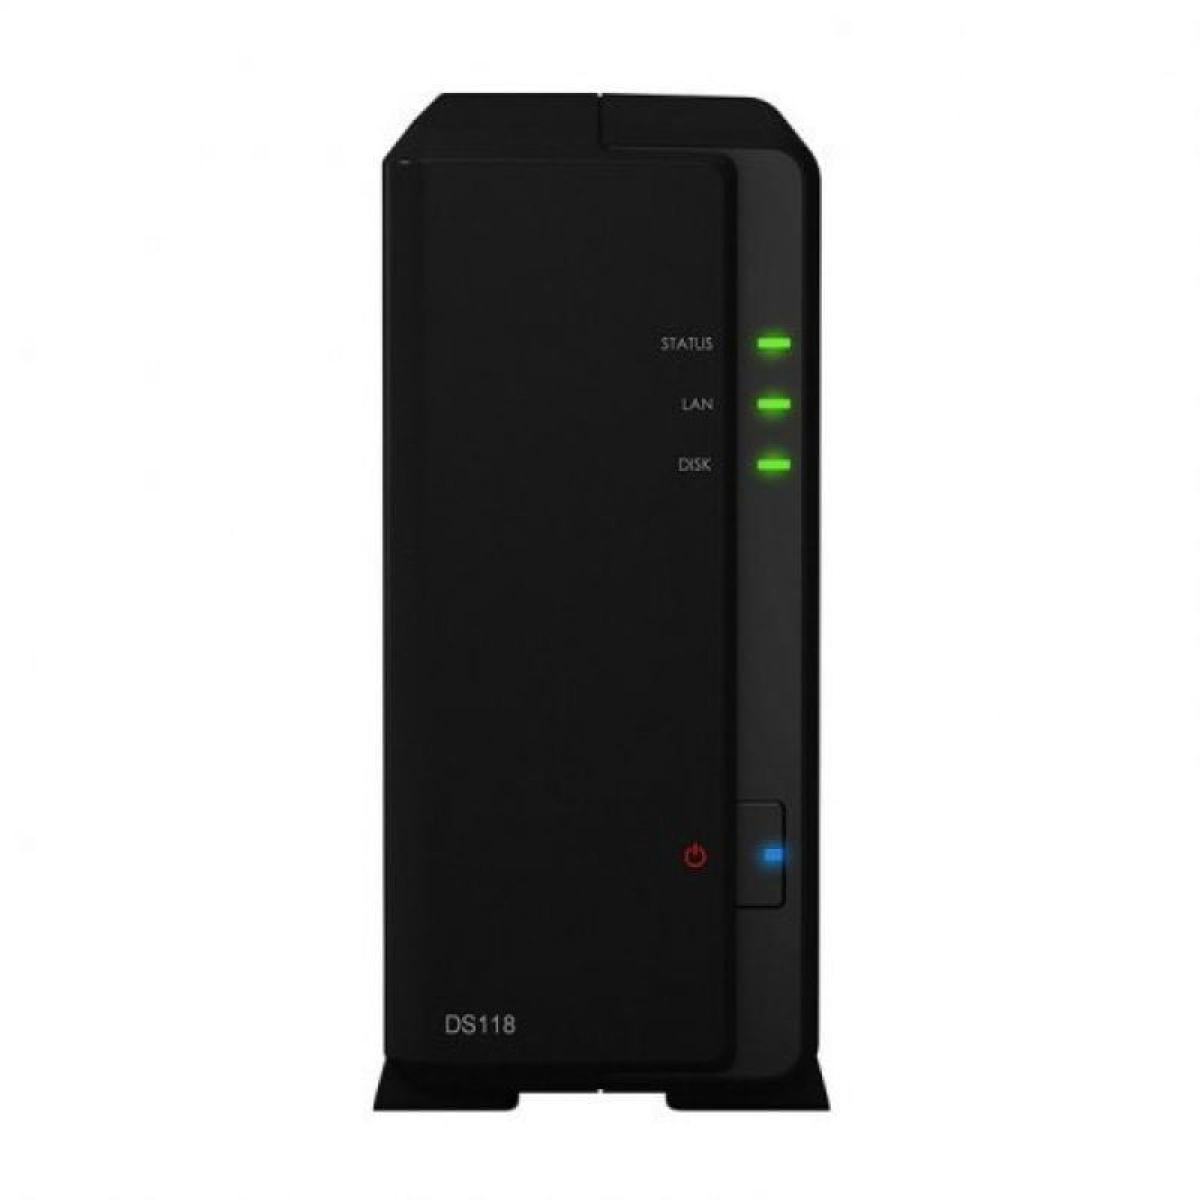 NAS SYNOLOGY DISKSTATION DS118/ 1 BAHIA 3.5"- 2.5"/ 1GB DDR4/ FORMATO TORRE